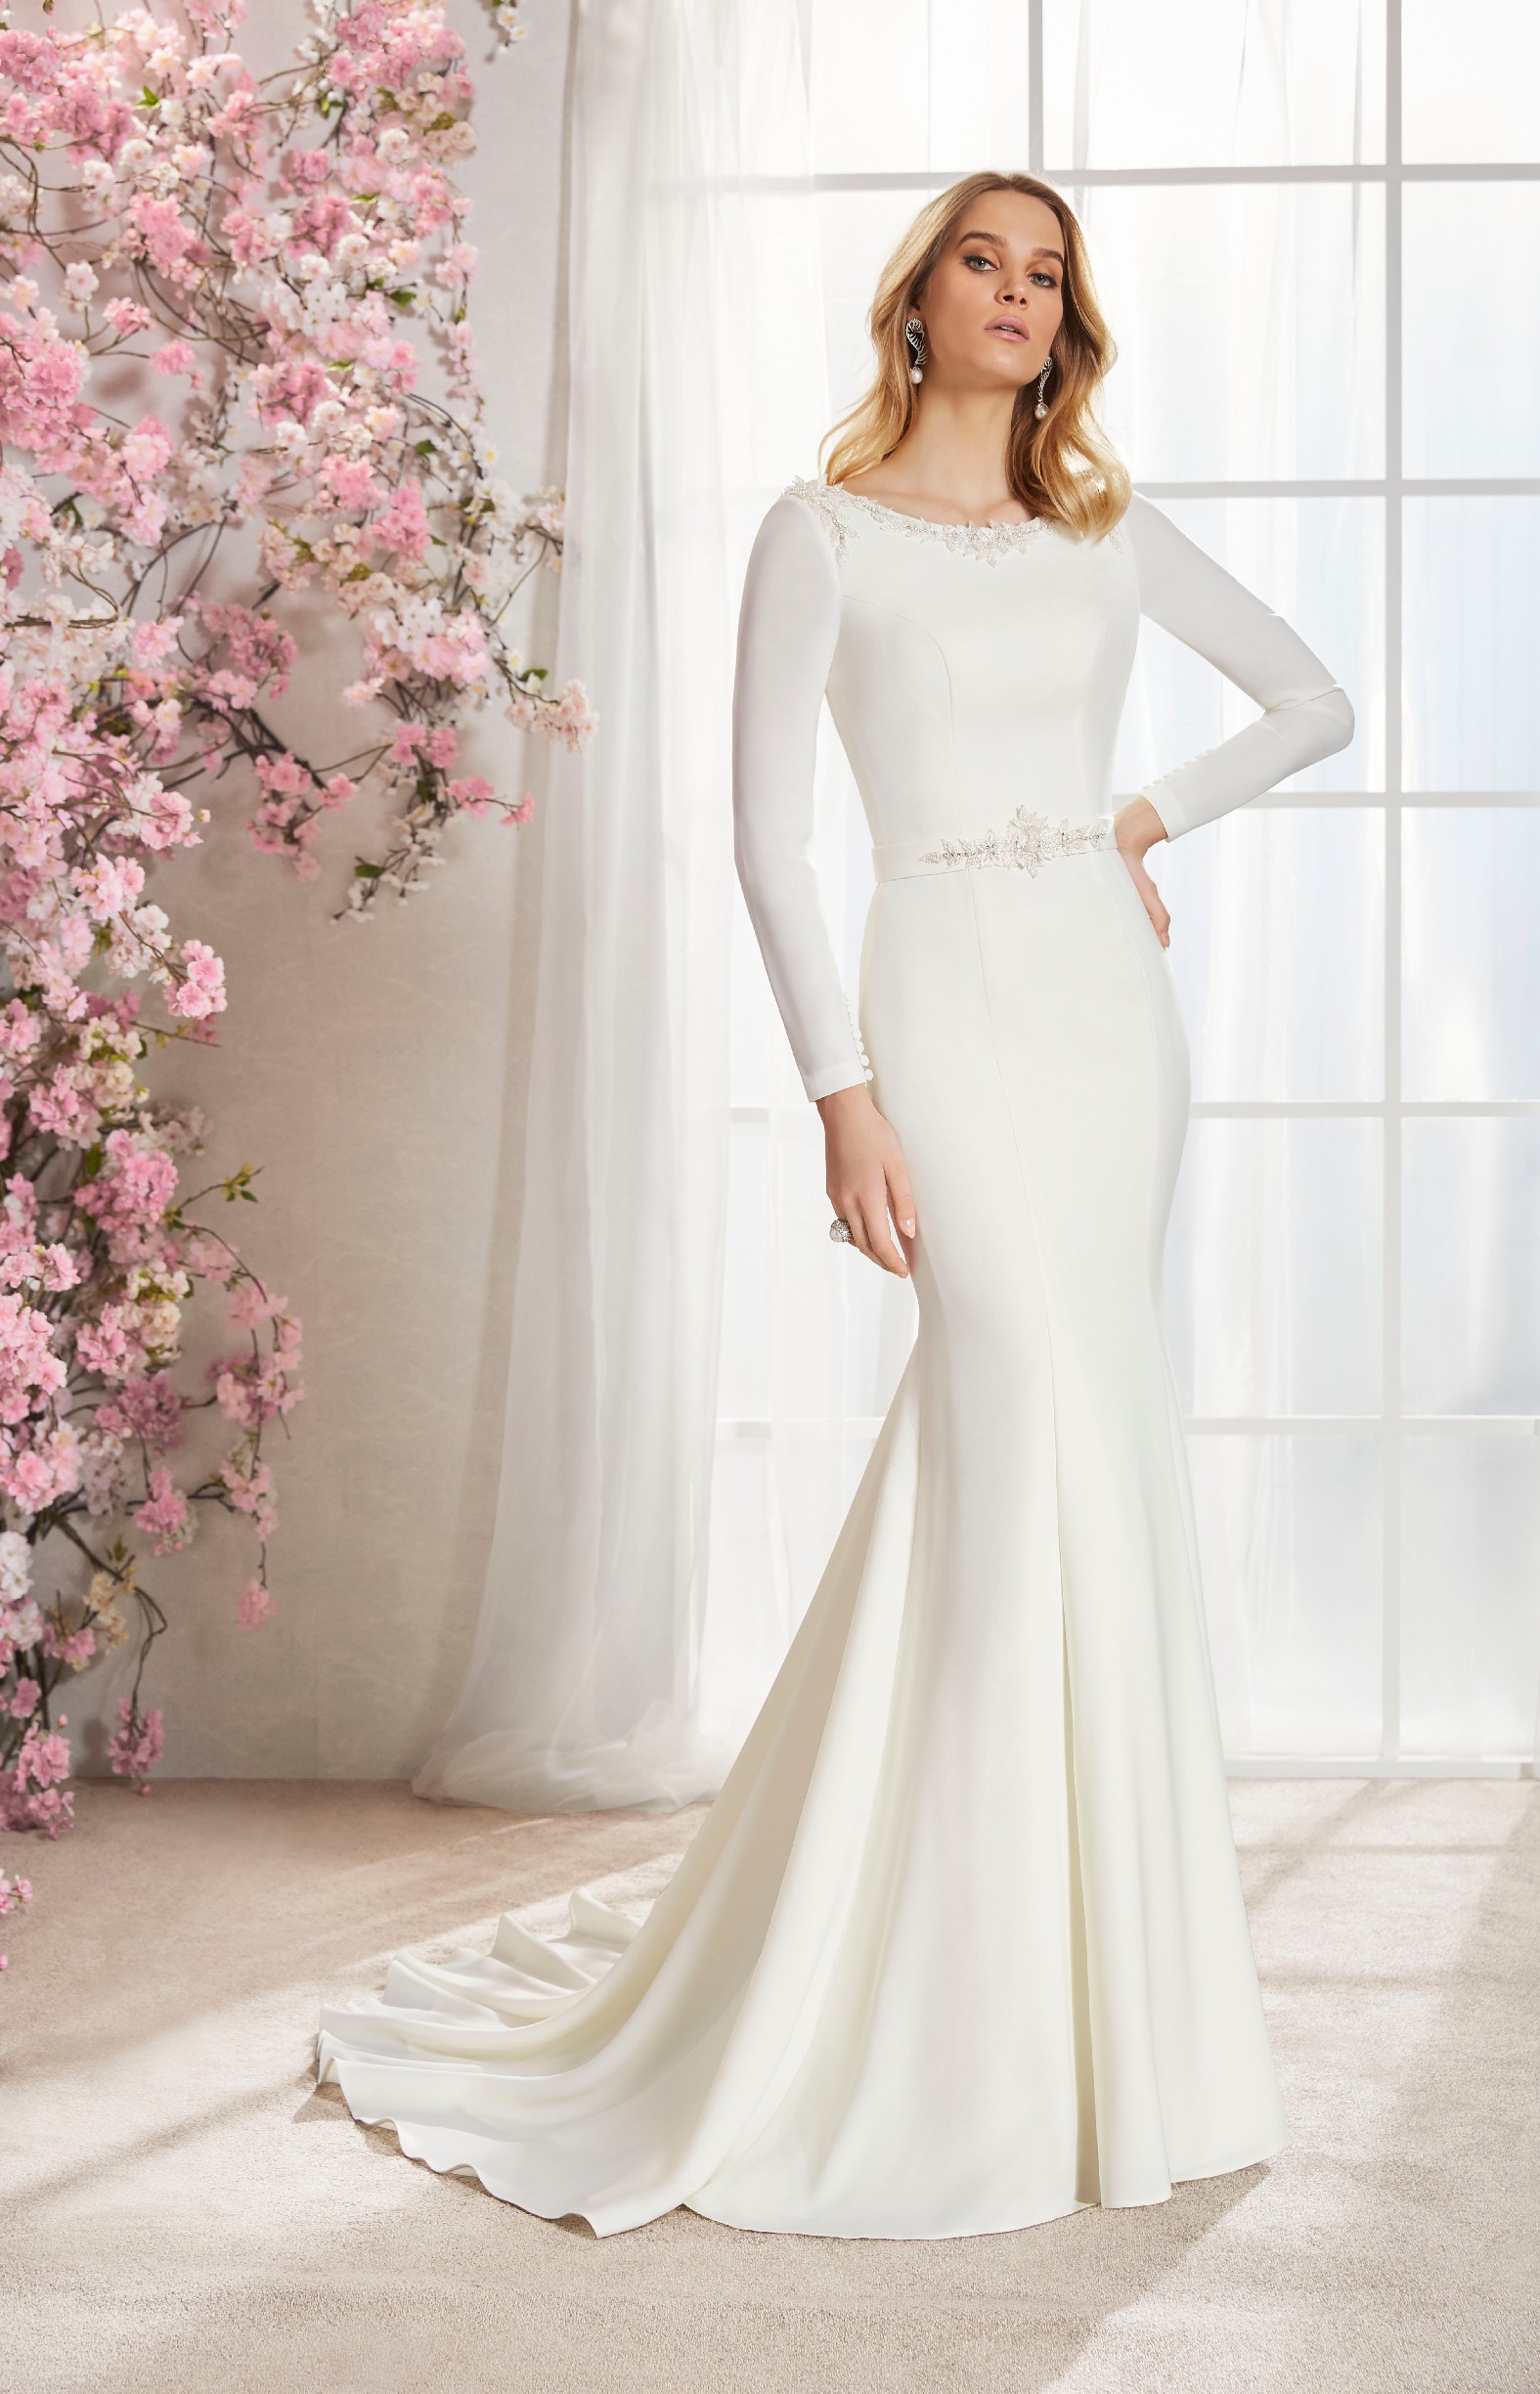 Blonde model stood in a cream room next to pink blossom in Ronald Joyce 18355, a plain fit and flare wedding dress with long sleeves and a sparkle belt and matching neckline